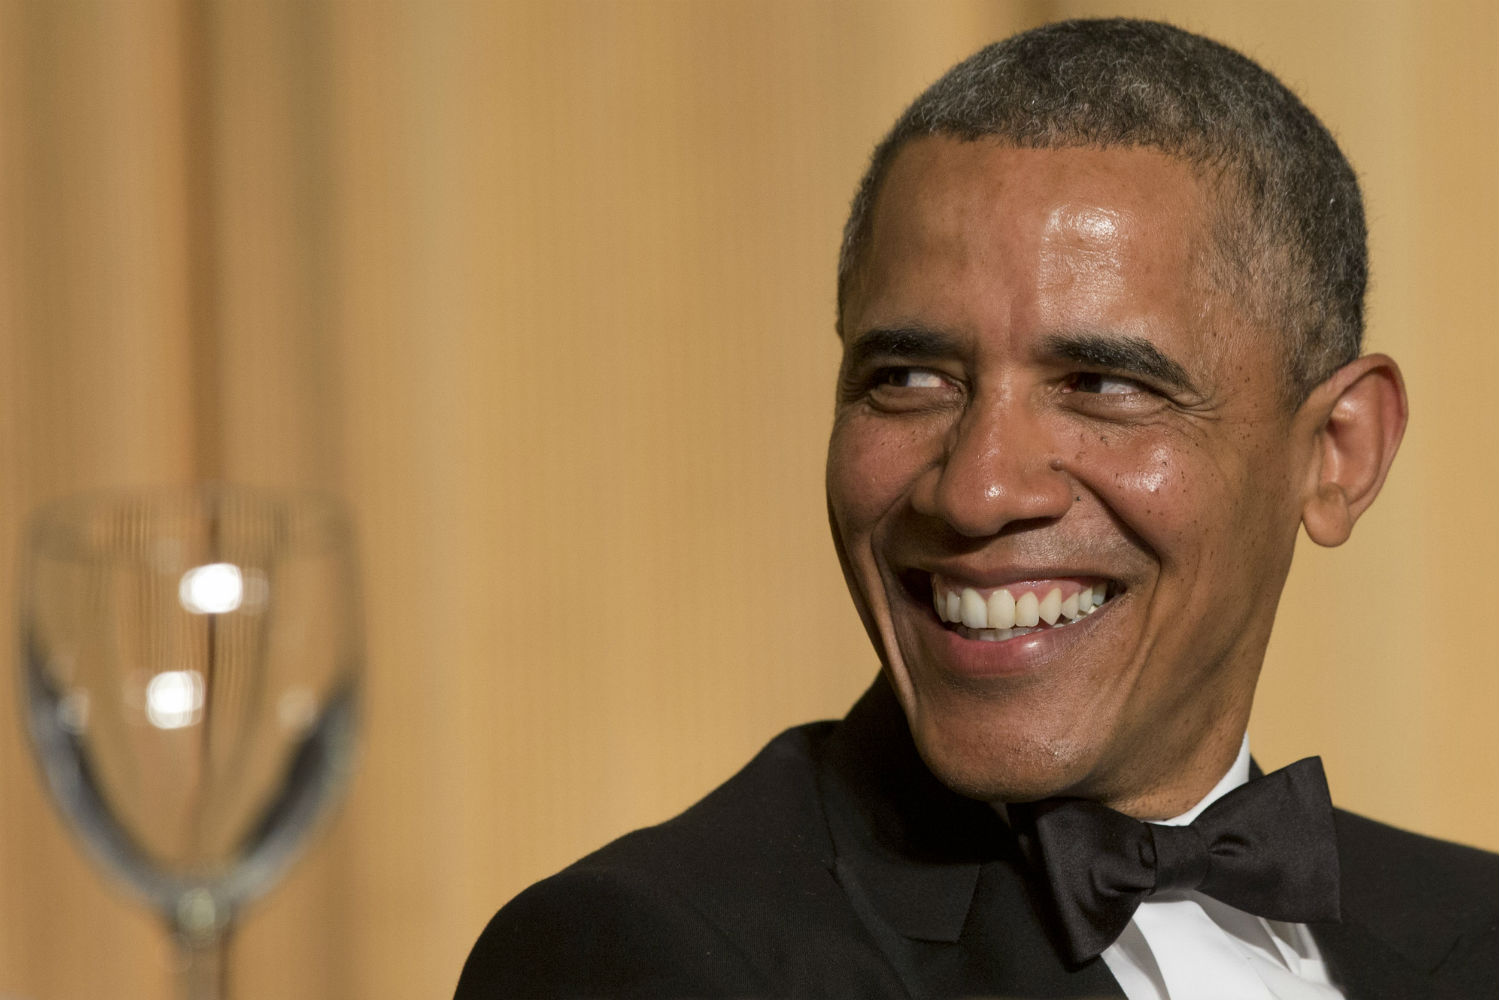 U.S. President Barack Obama at the White House Correspondents Dinner in May 2014. (Jacquelyn Martin, AP)